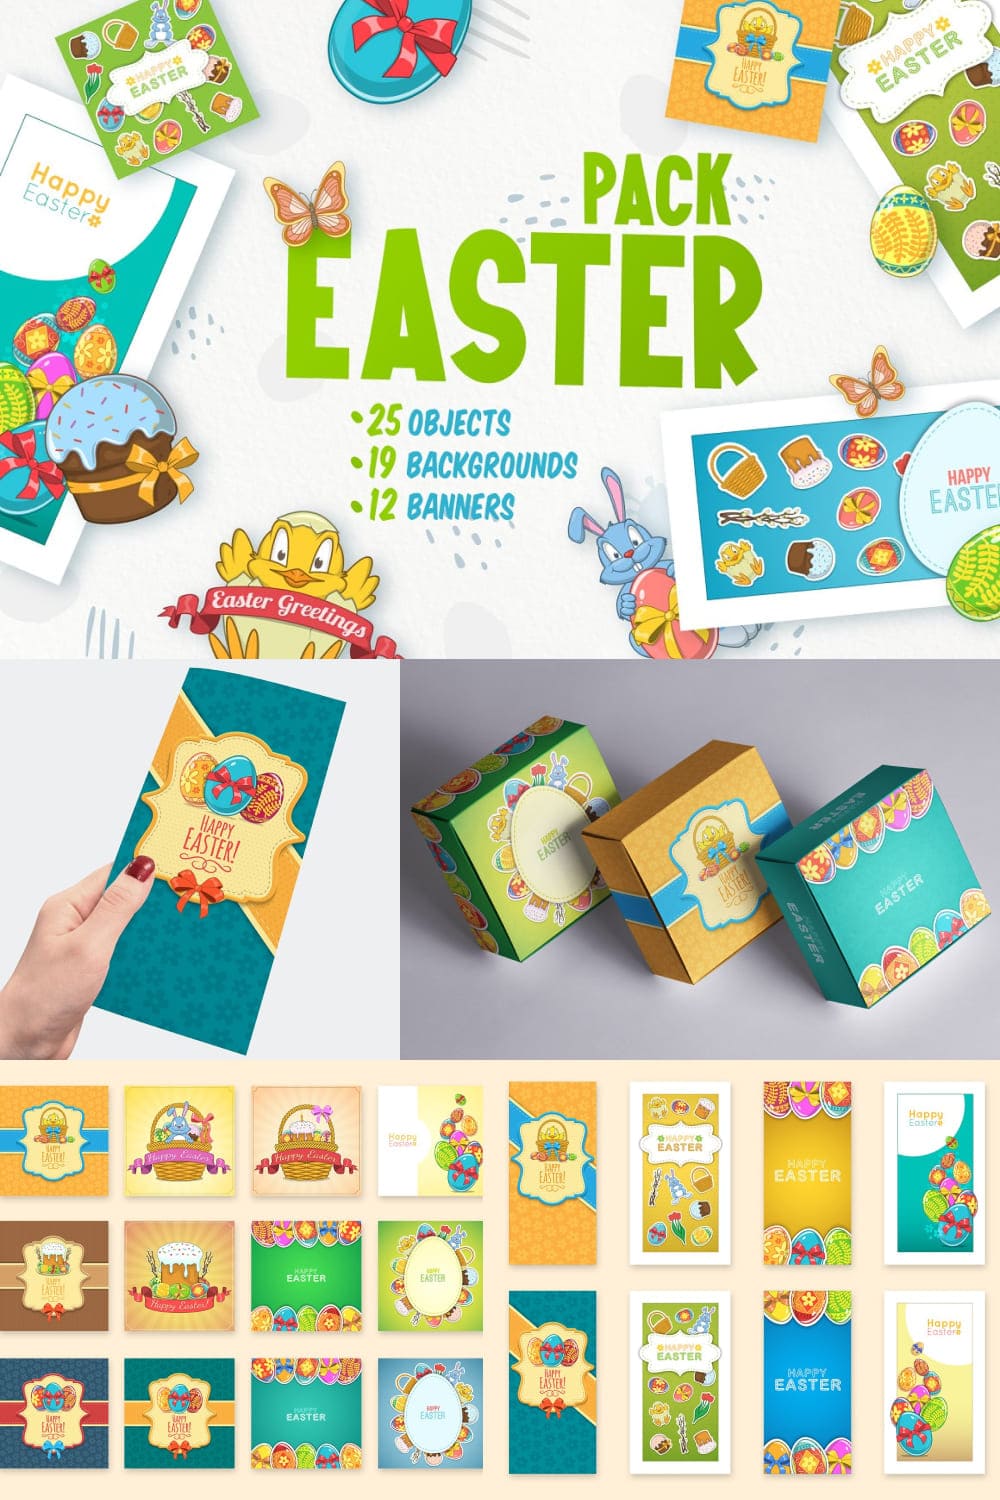 Easter Objects And Backgrounds - Pinterest.